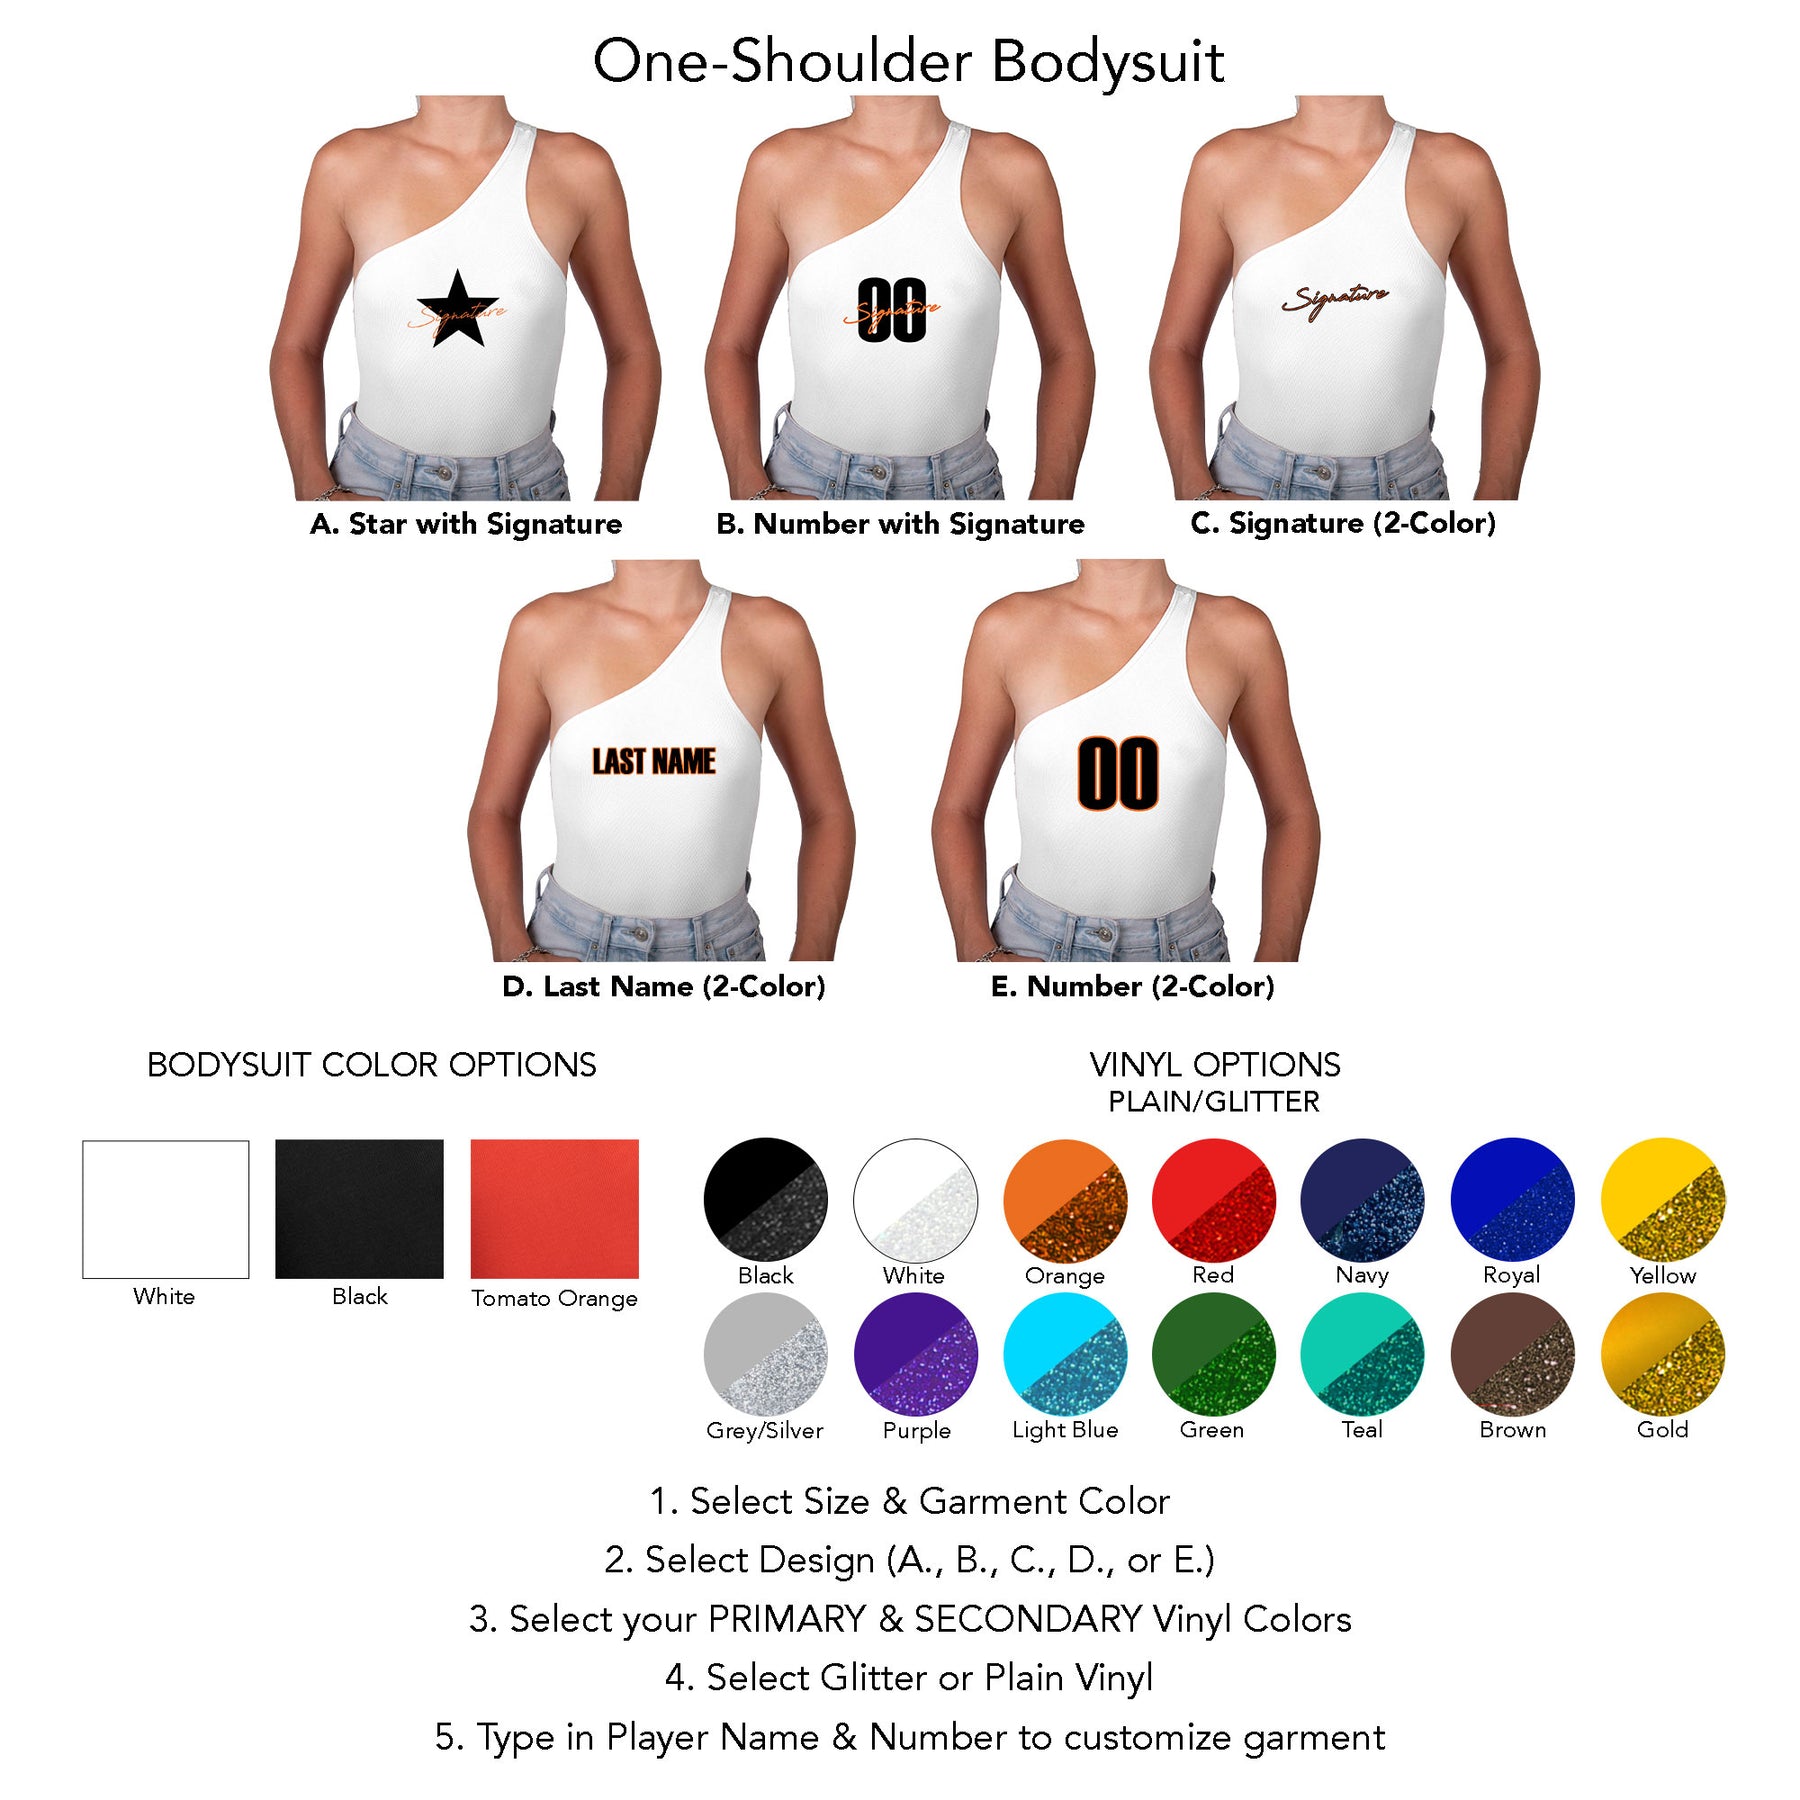 Made-to-Order Bodysuit